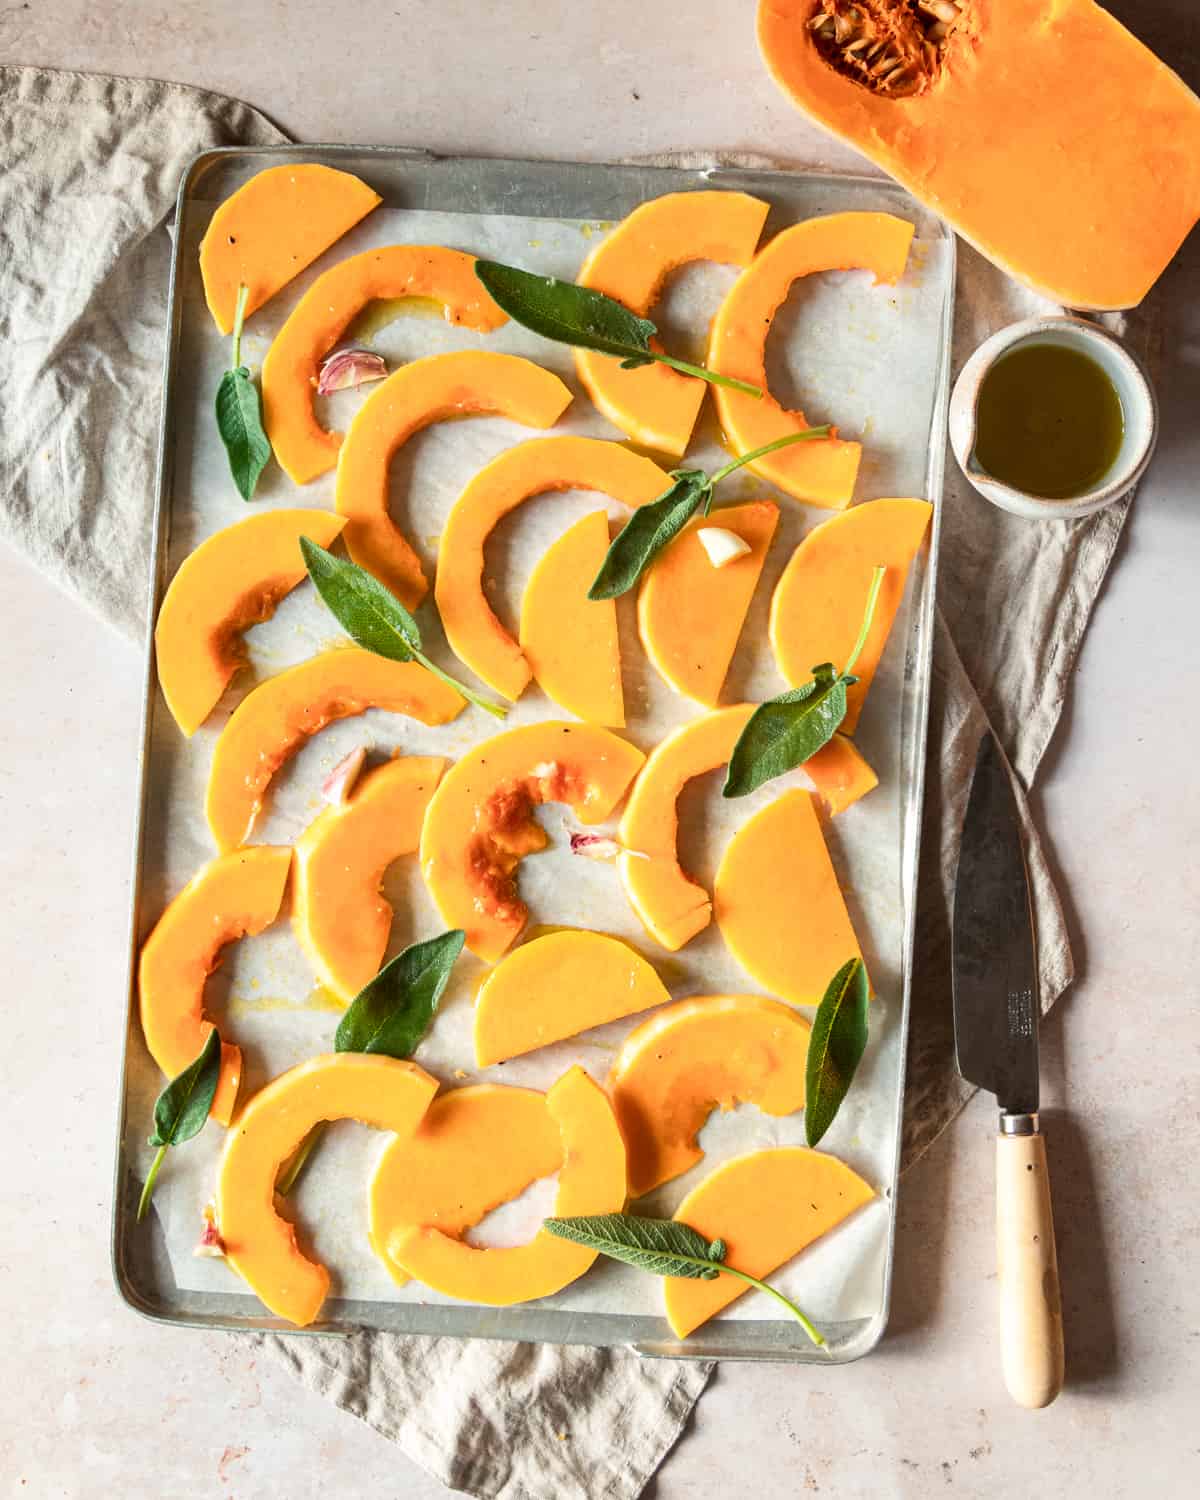 slices of butternit squash on a tray with sage and olive oil